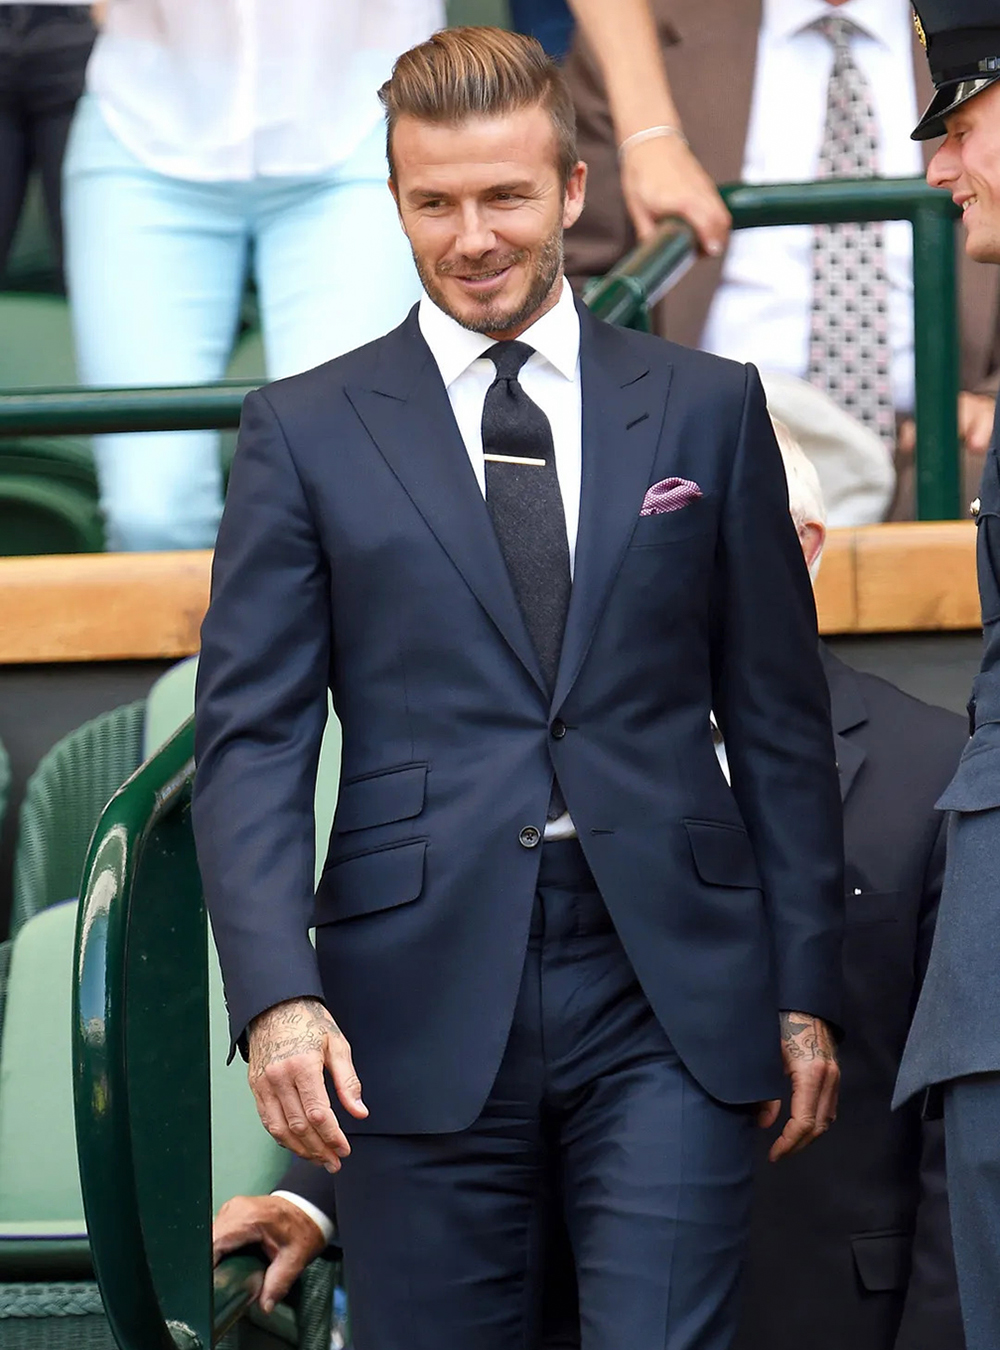 David Beckham Clothes and Outfits